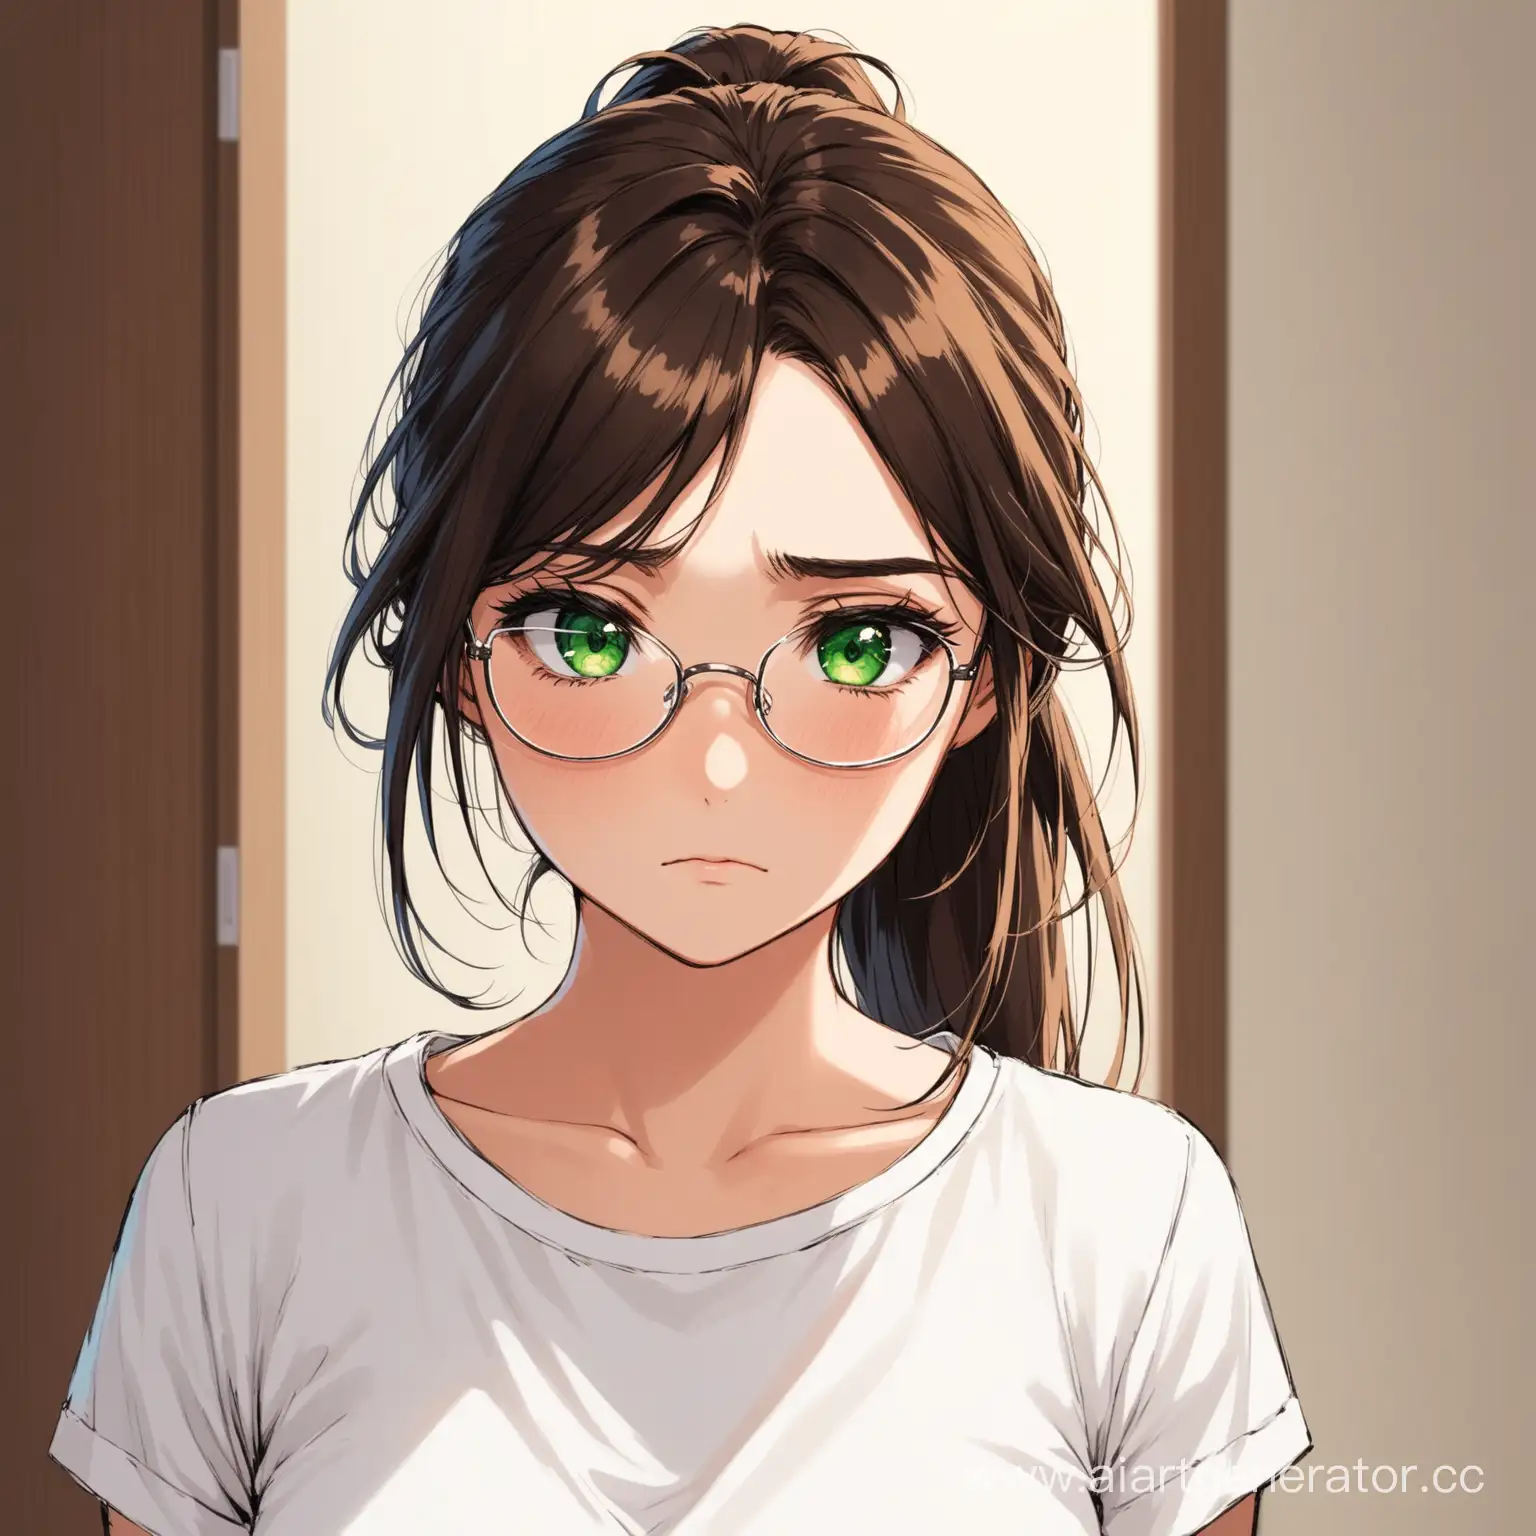 Sad-Brunette-Woman-in-White-TShirt-with-Smudged-Mascara-and-Glasses-by-Wardrobe